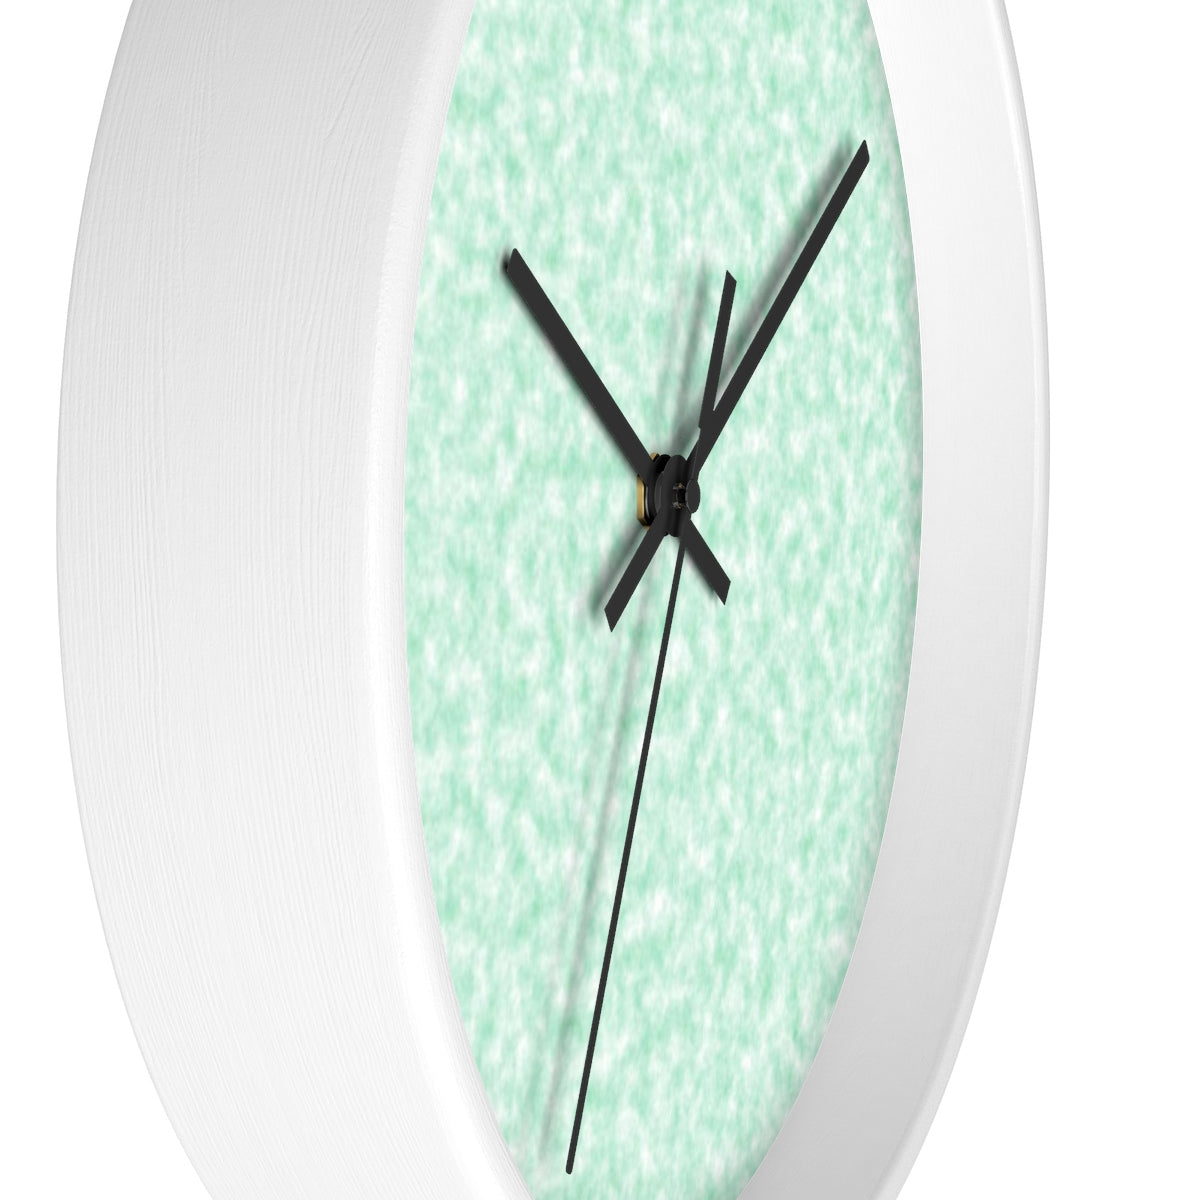 Seafoam Green and White Clouds Wall Clock